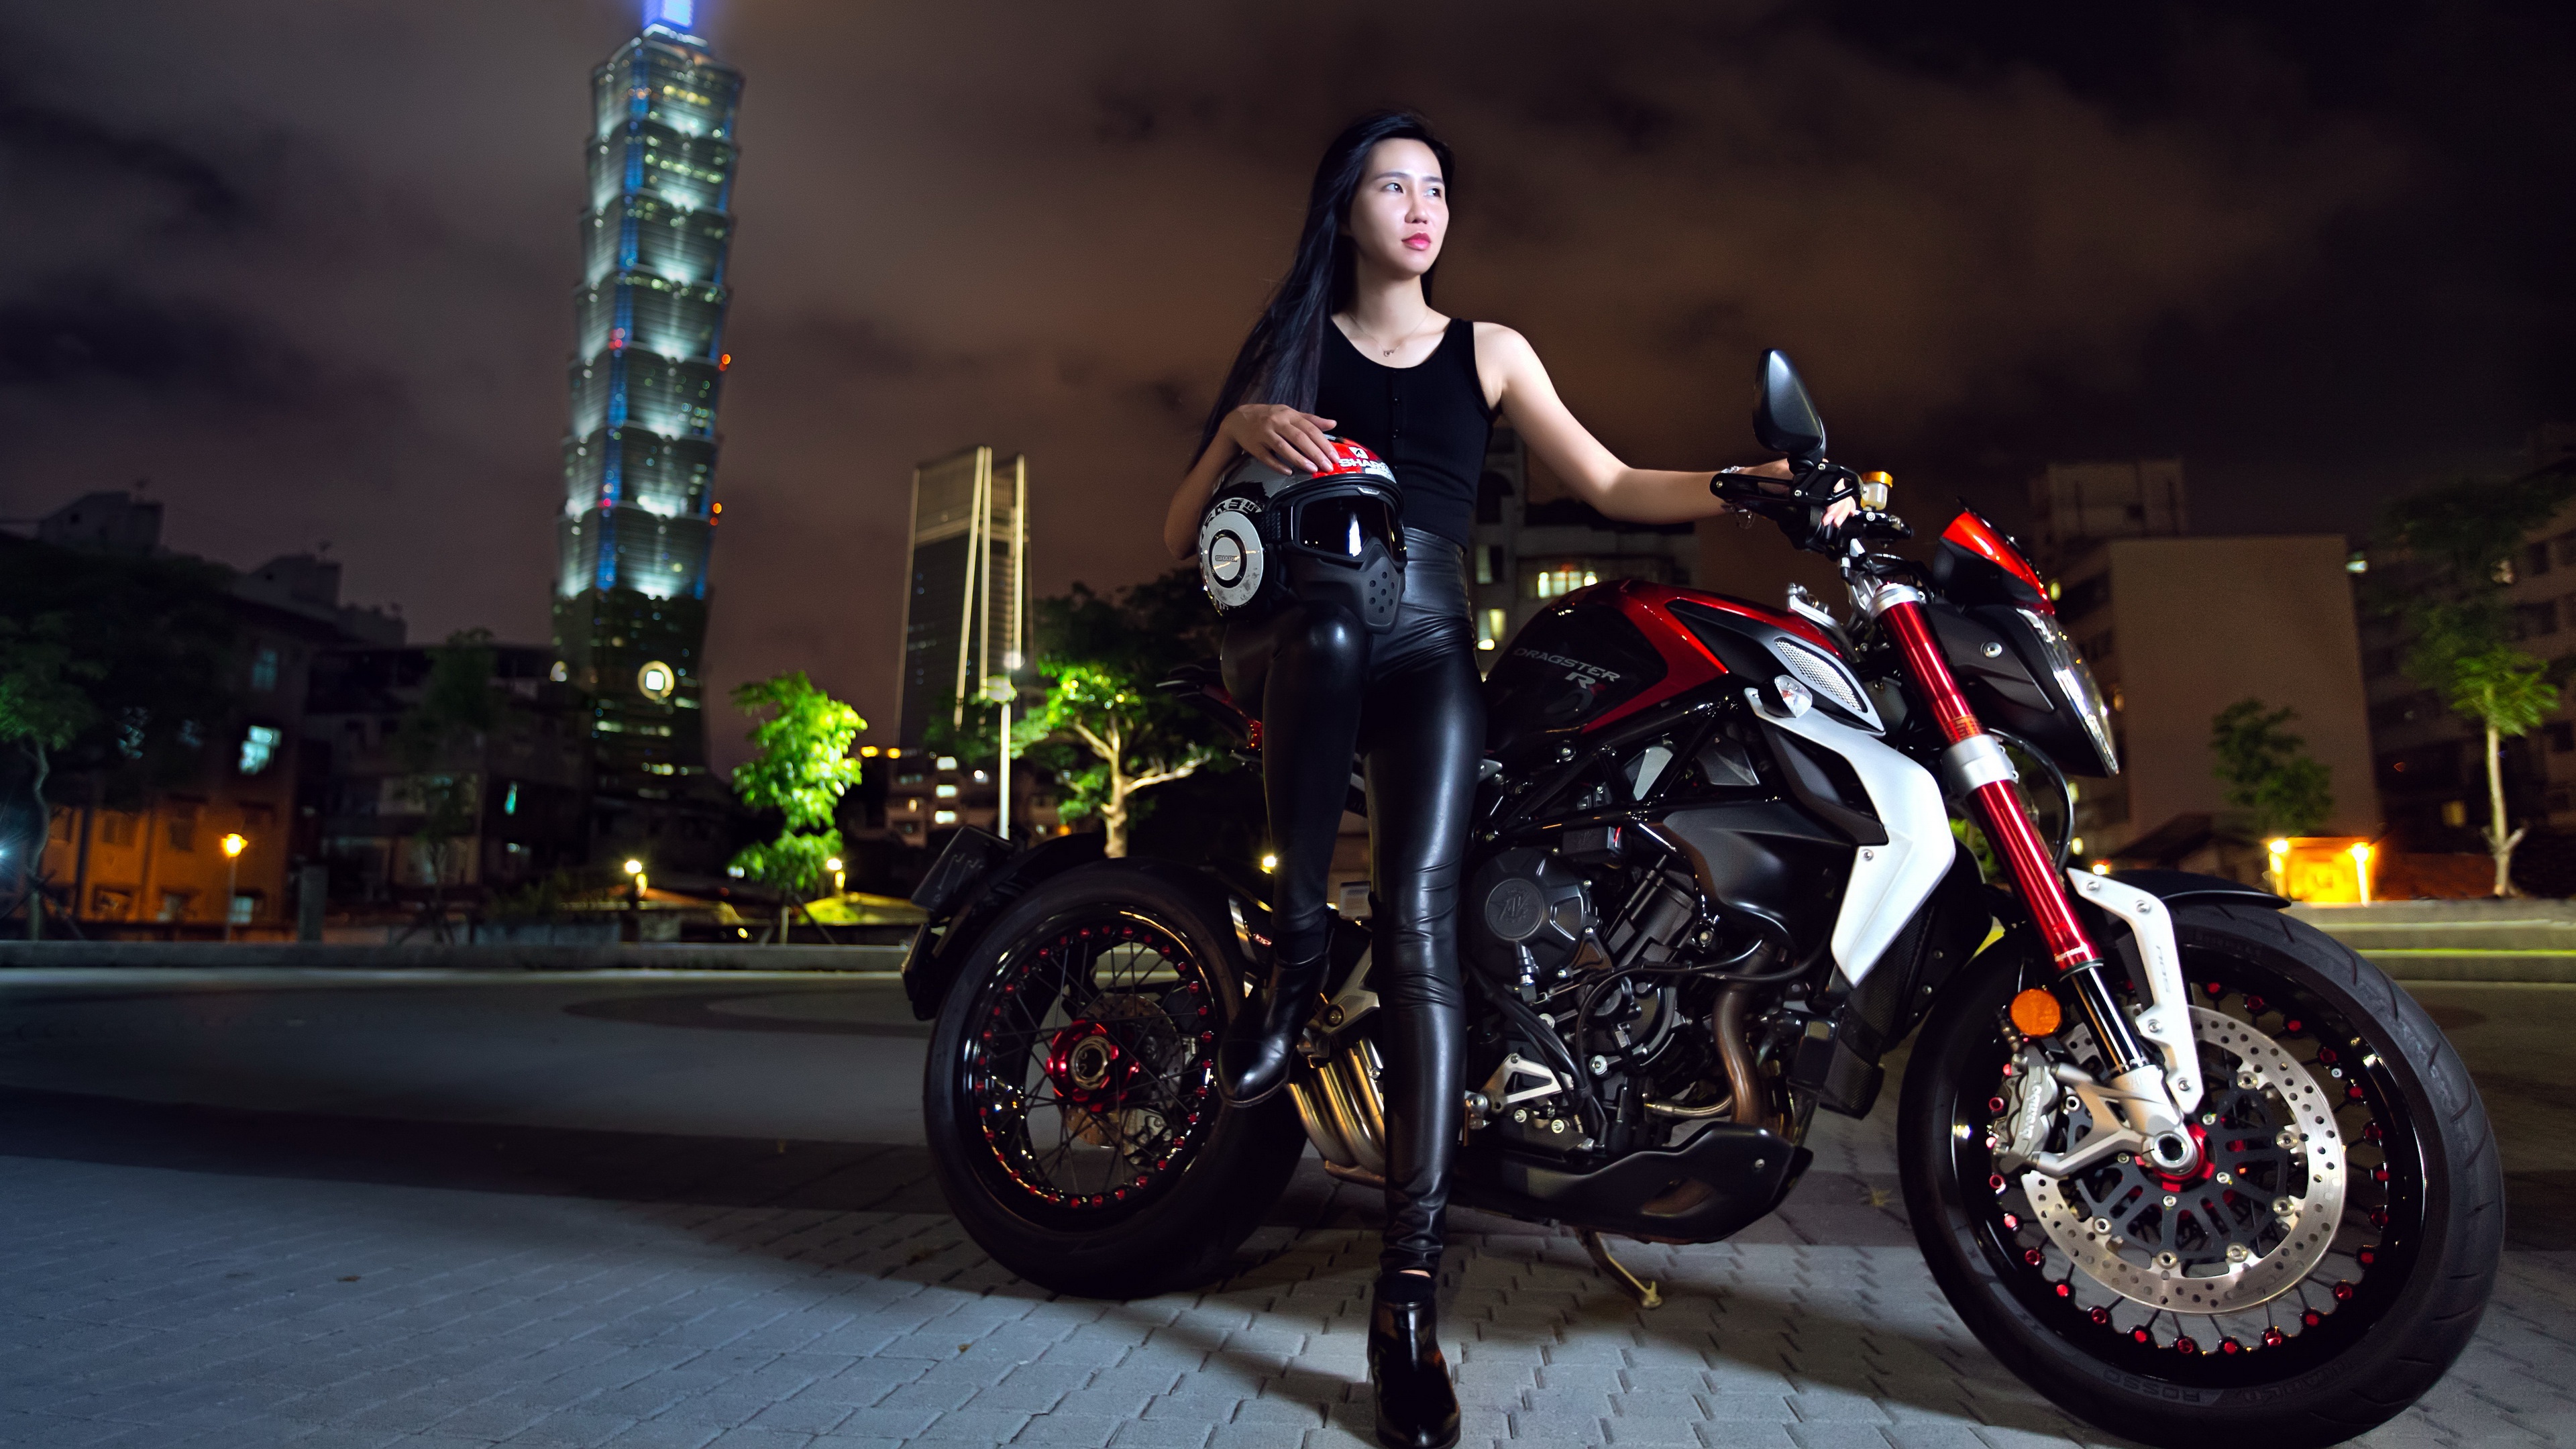 Women Model Dark Hair Asian Motorcycle Vehicle Women With Motorcycles Looking Into The Distance Long 3840x2160